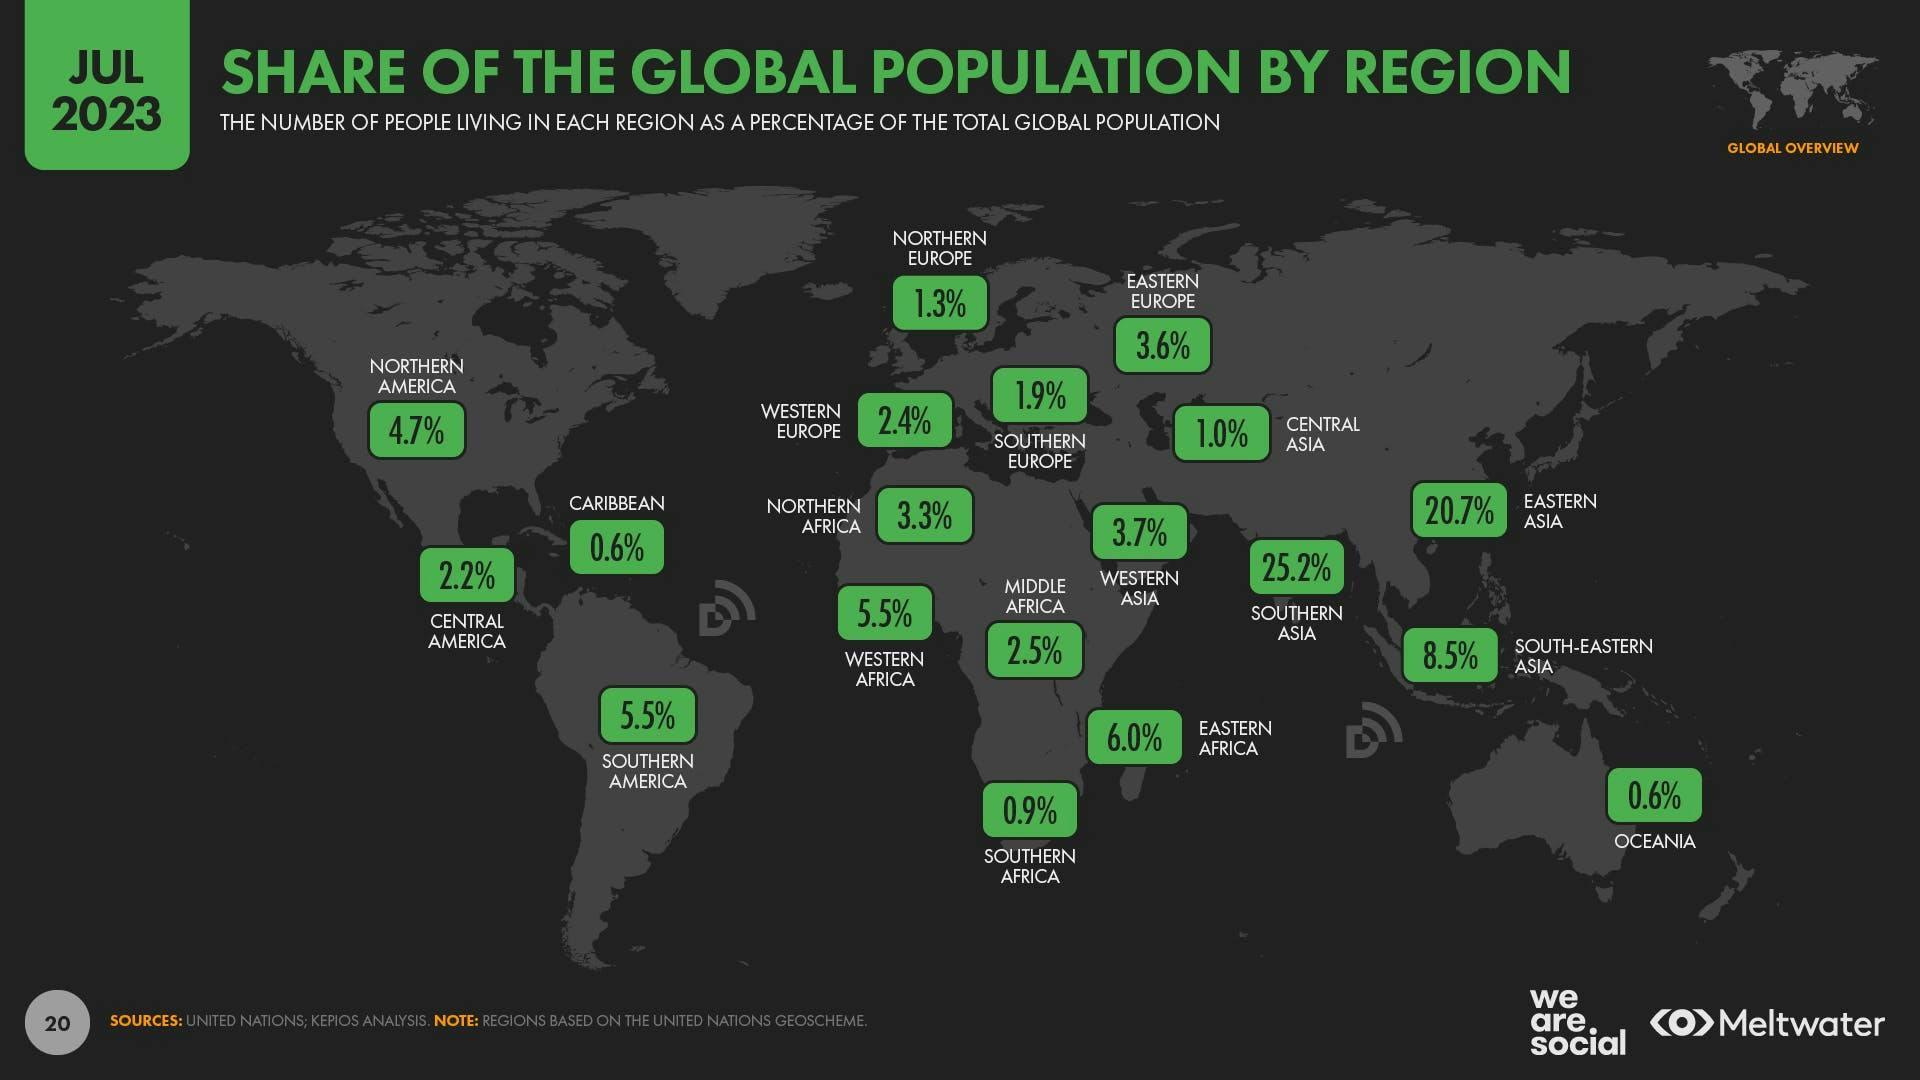 A map showing the shares of global population by region.